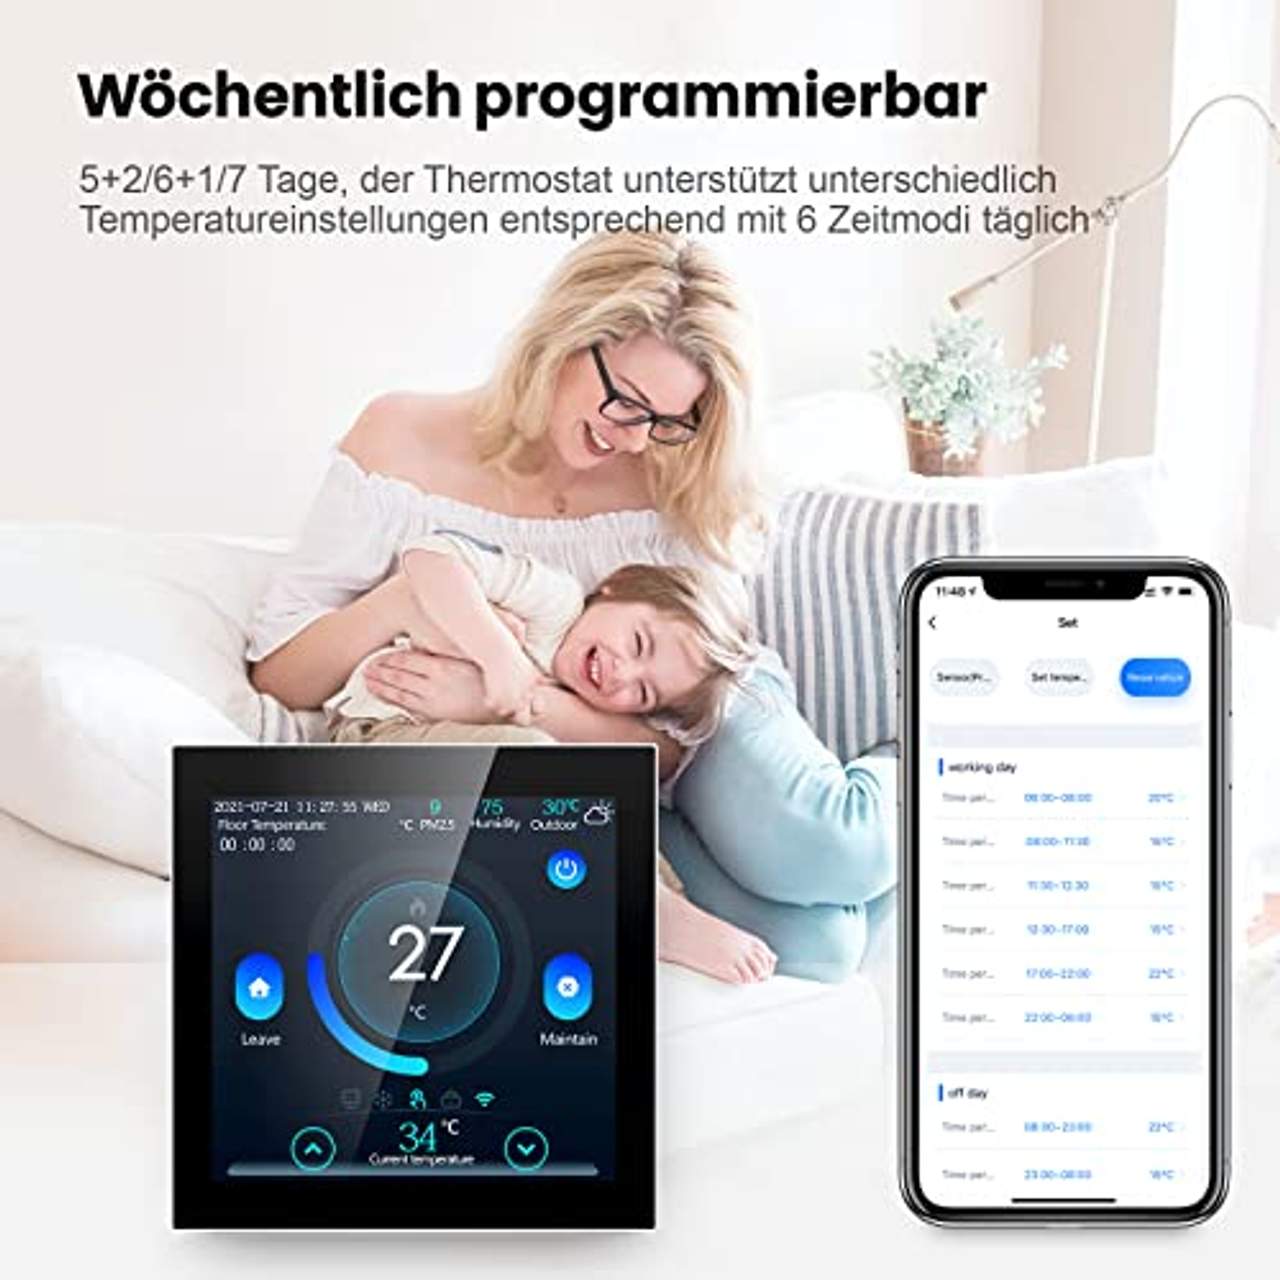 AVATTO Smartes Thermostat -Touchscreen WLAN fähiges Programmierbarer